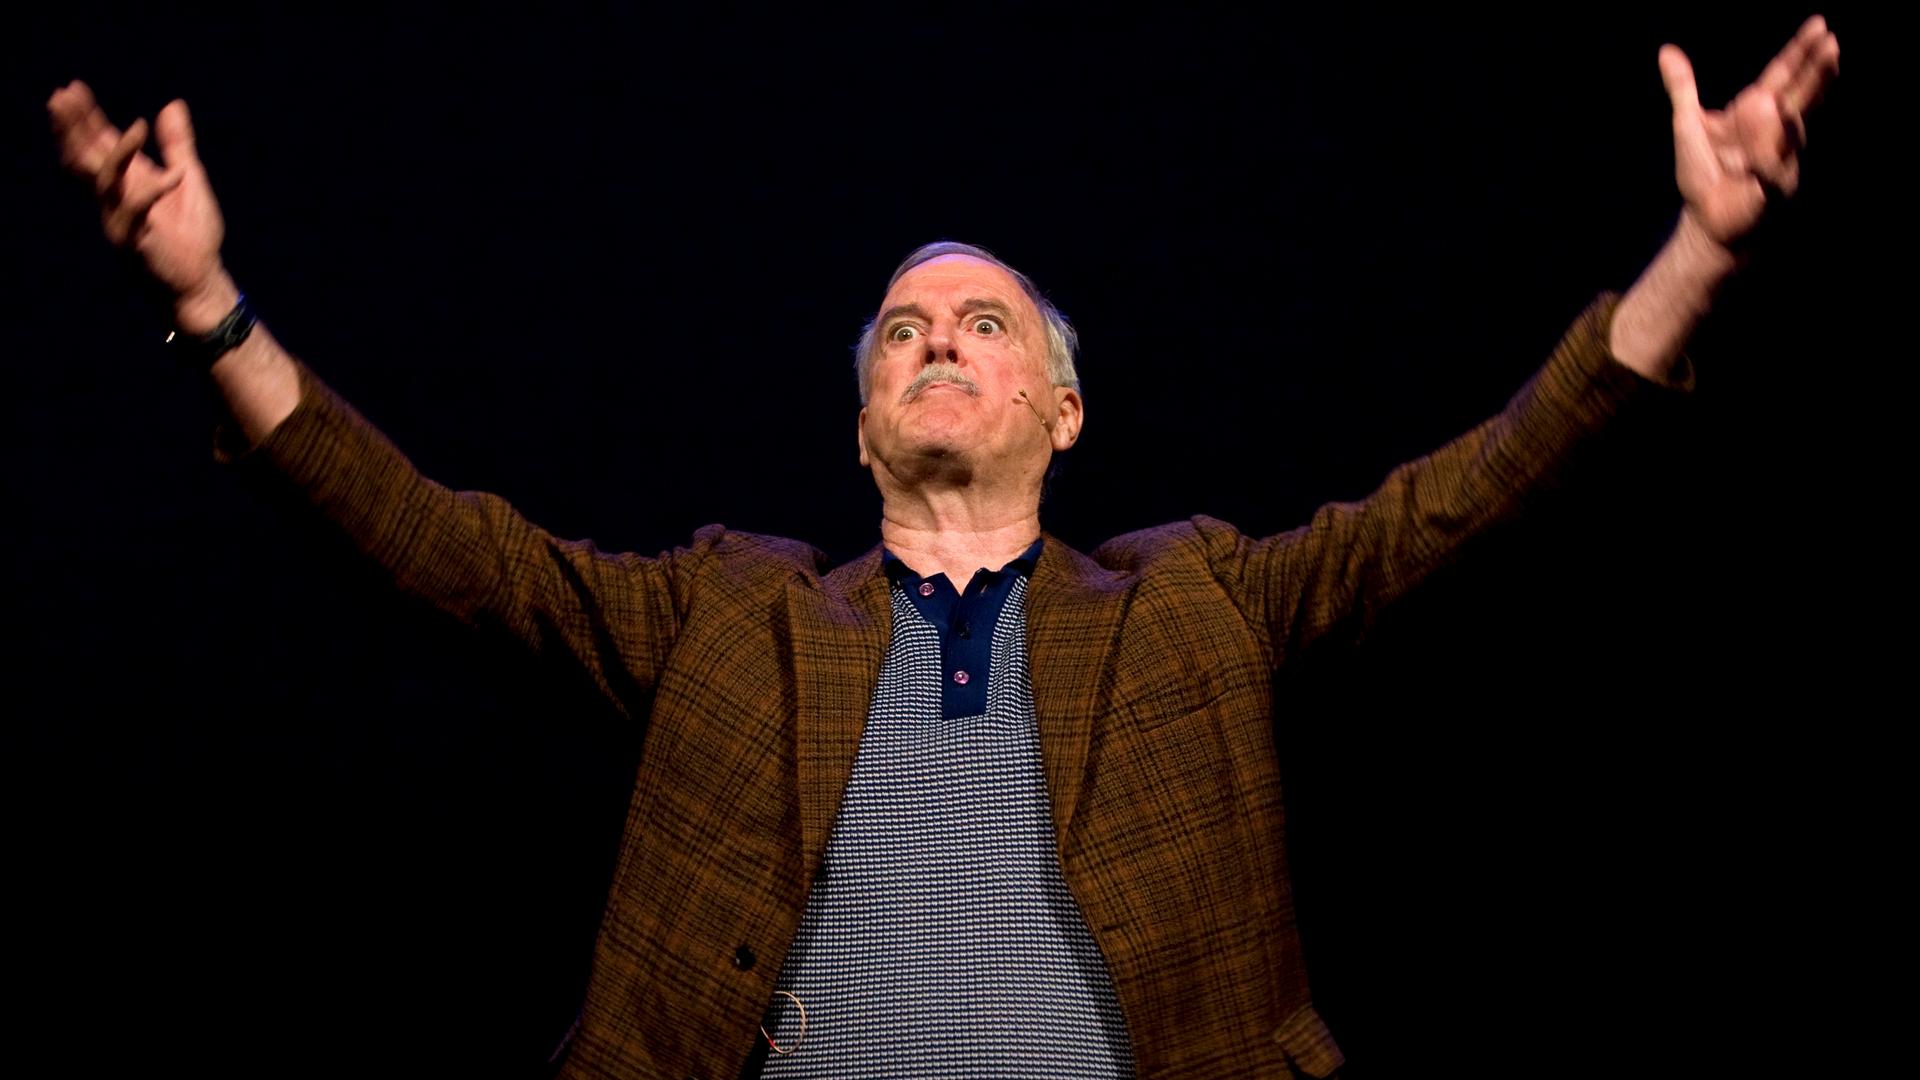 John Cleese performing during a dress rehearsal of his one man show in 2009.